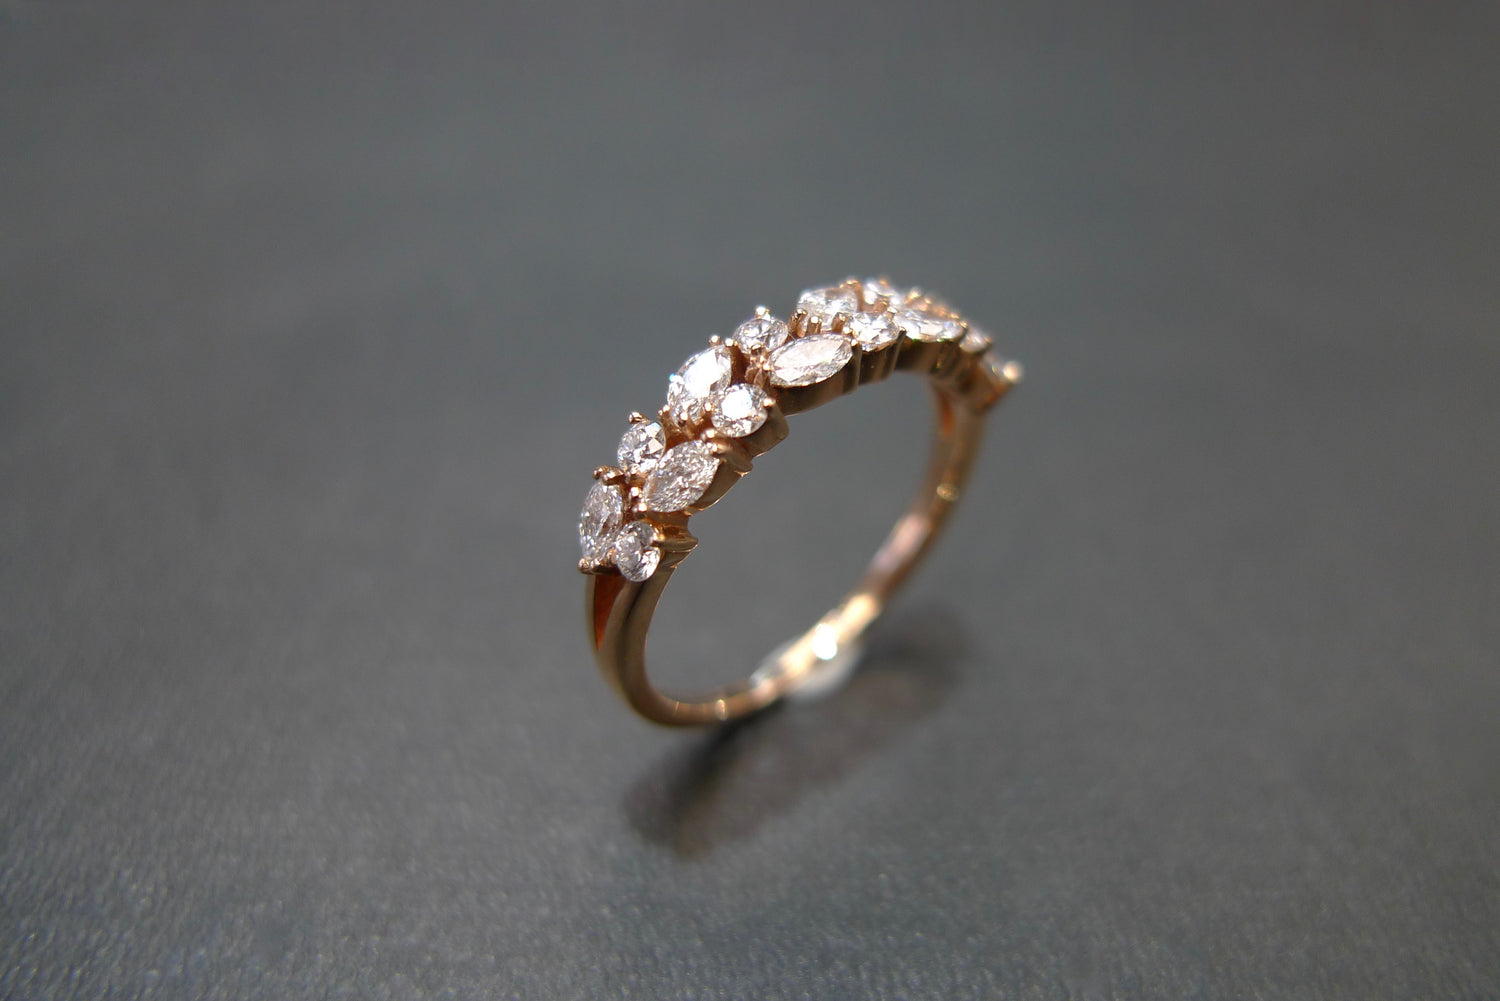 4mm Marquise Diamond Wedding Ring in 18K Rose Gold - HN JEWELRY